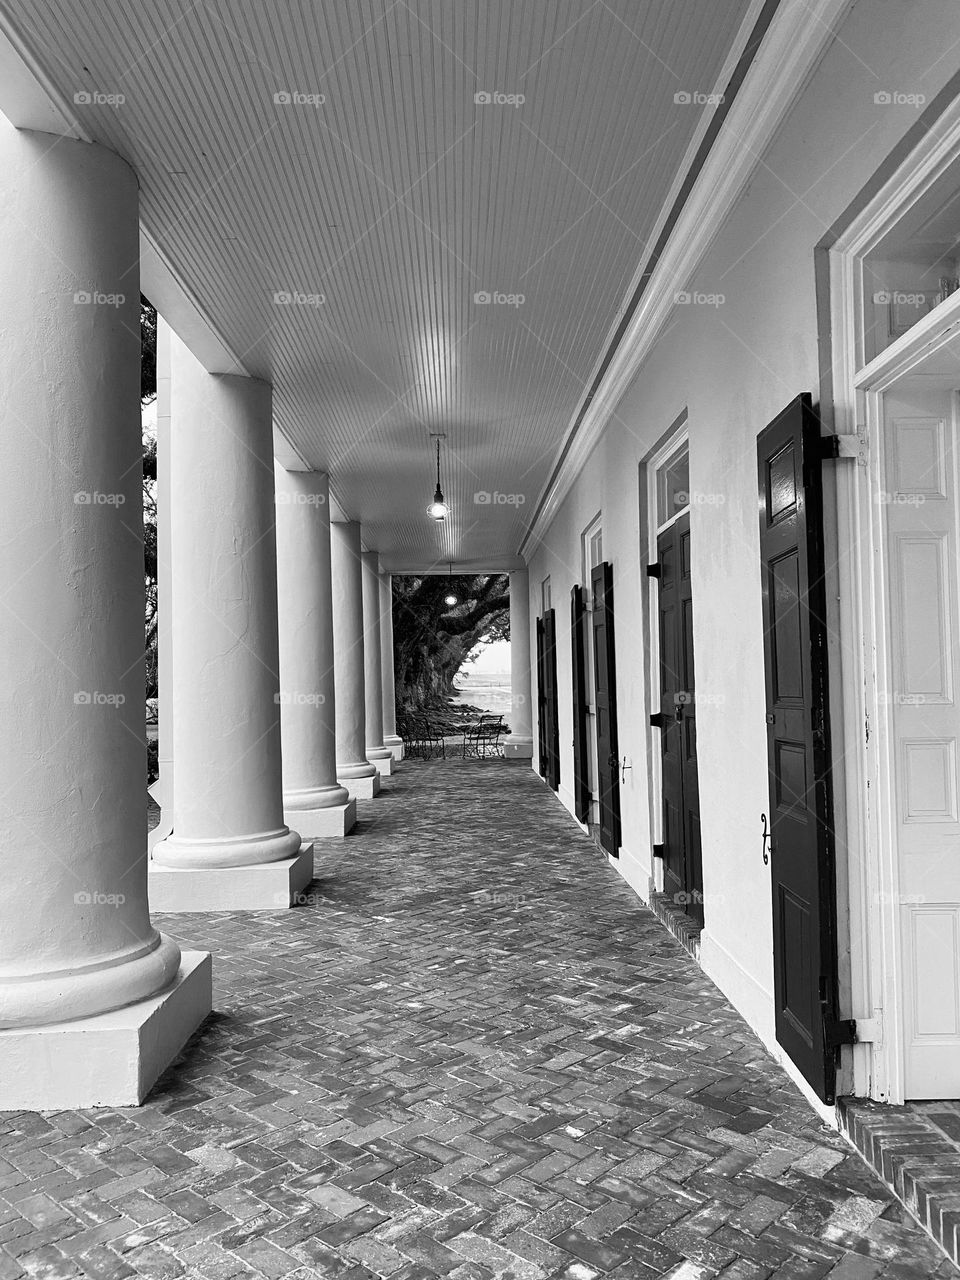 An outdoor walkway with columns on one side and doors on the other